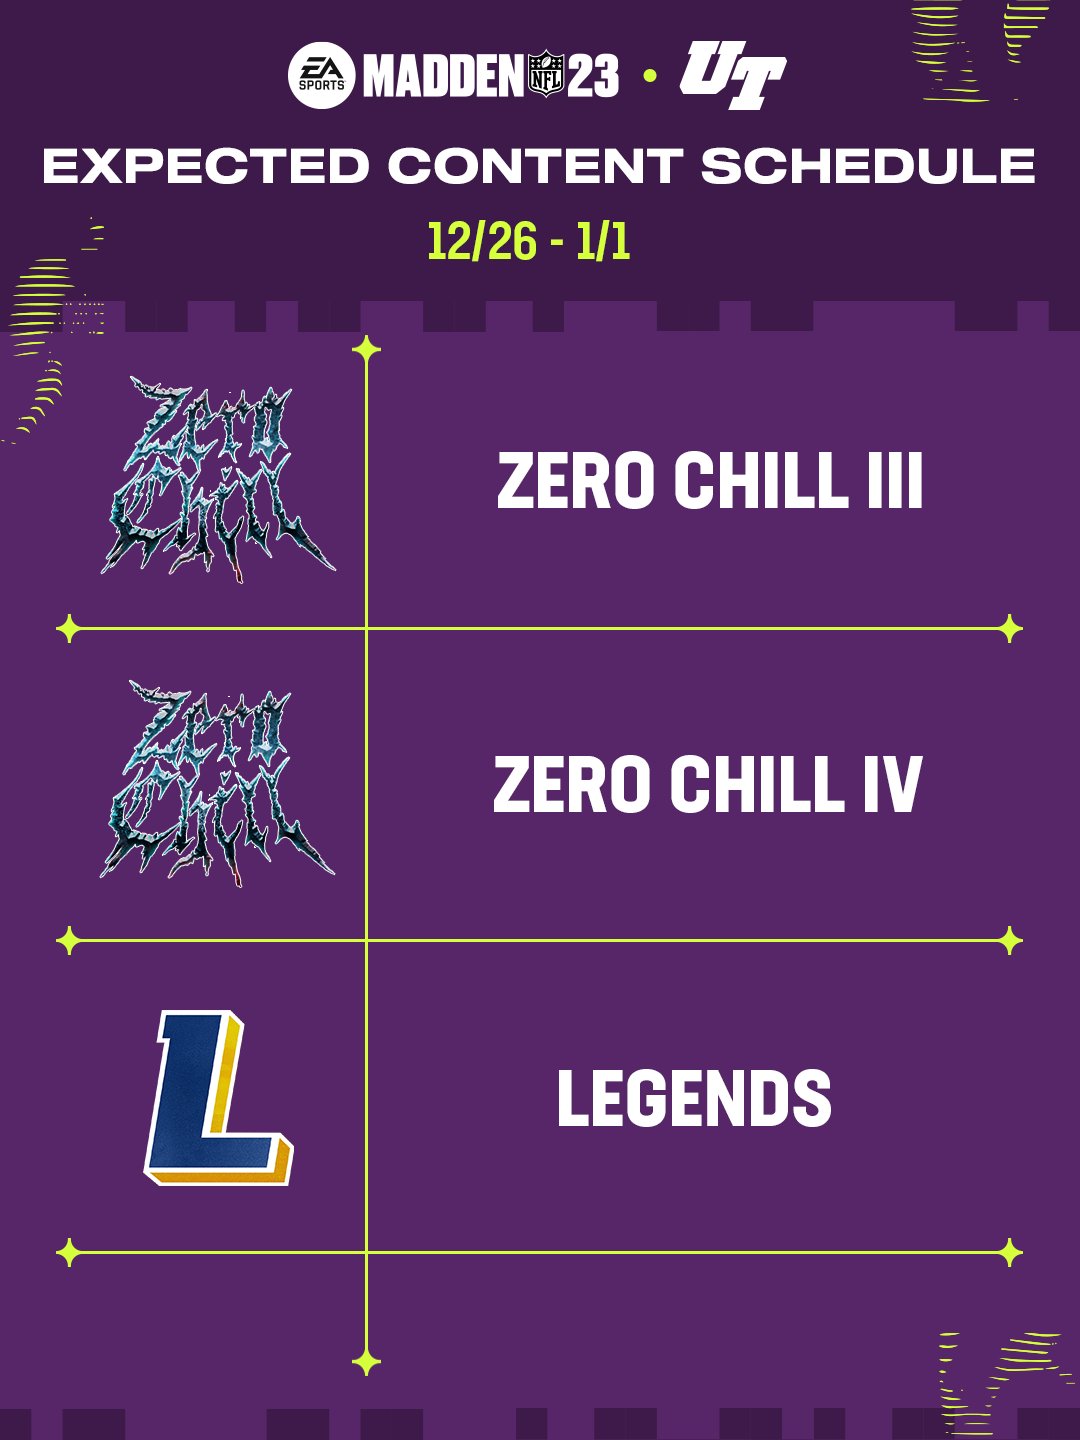 Per EA MUT Twitter] MUT Content For The Week of 12/26/22 To 1/1/23!! Zero  Chill Part 3 [Tuesday, 12/27], Zero Chill Part 4 [Thursday, 12/29], And  Legends [Saturday, 12/31]! TOTW And GMM